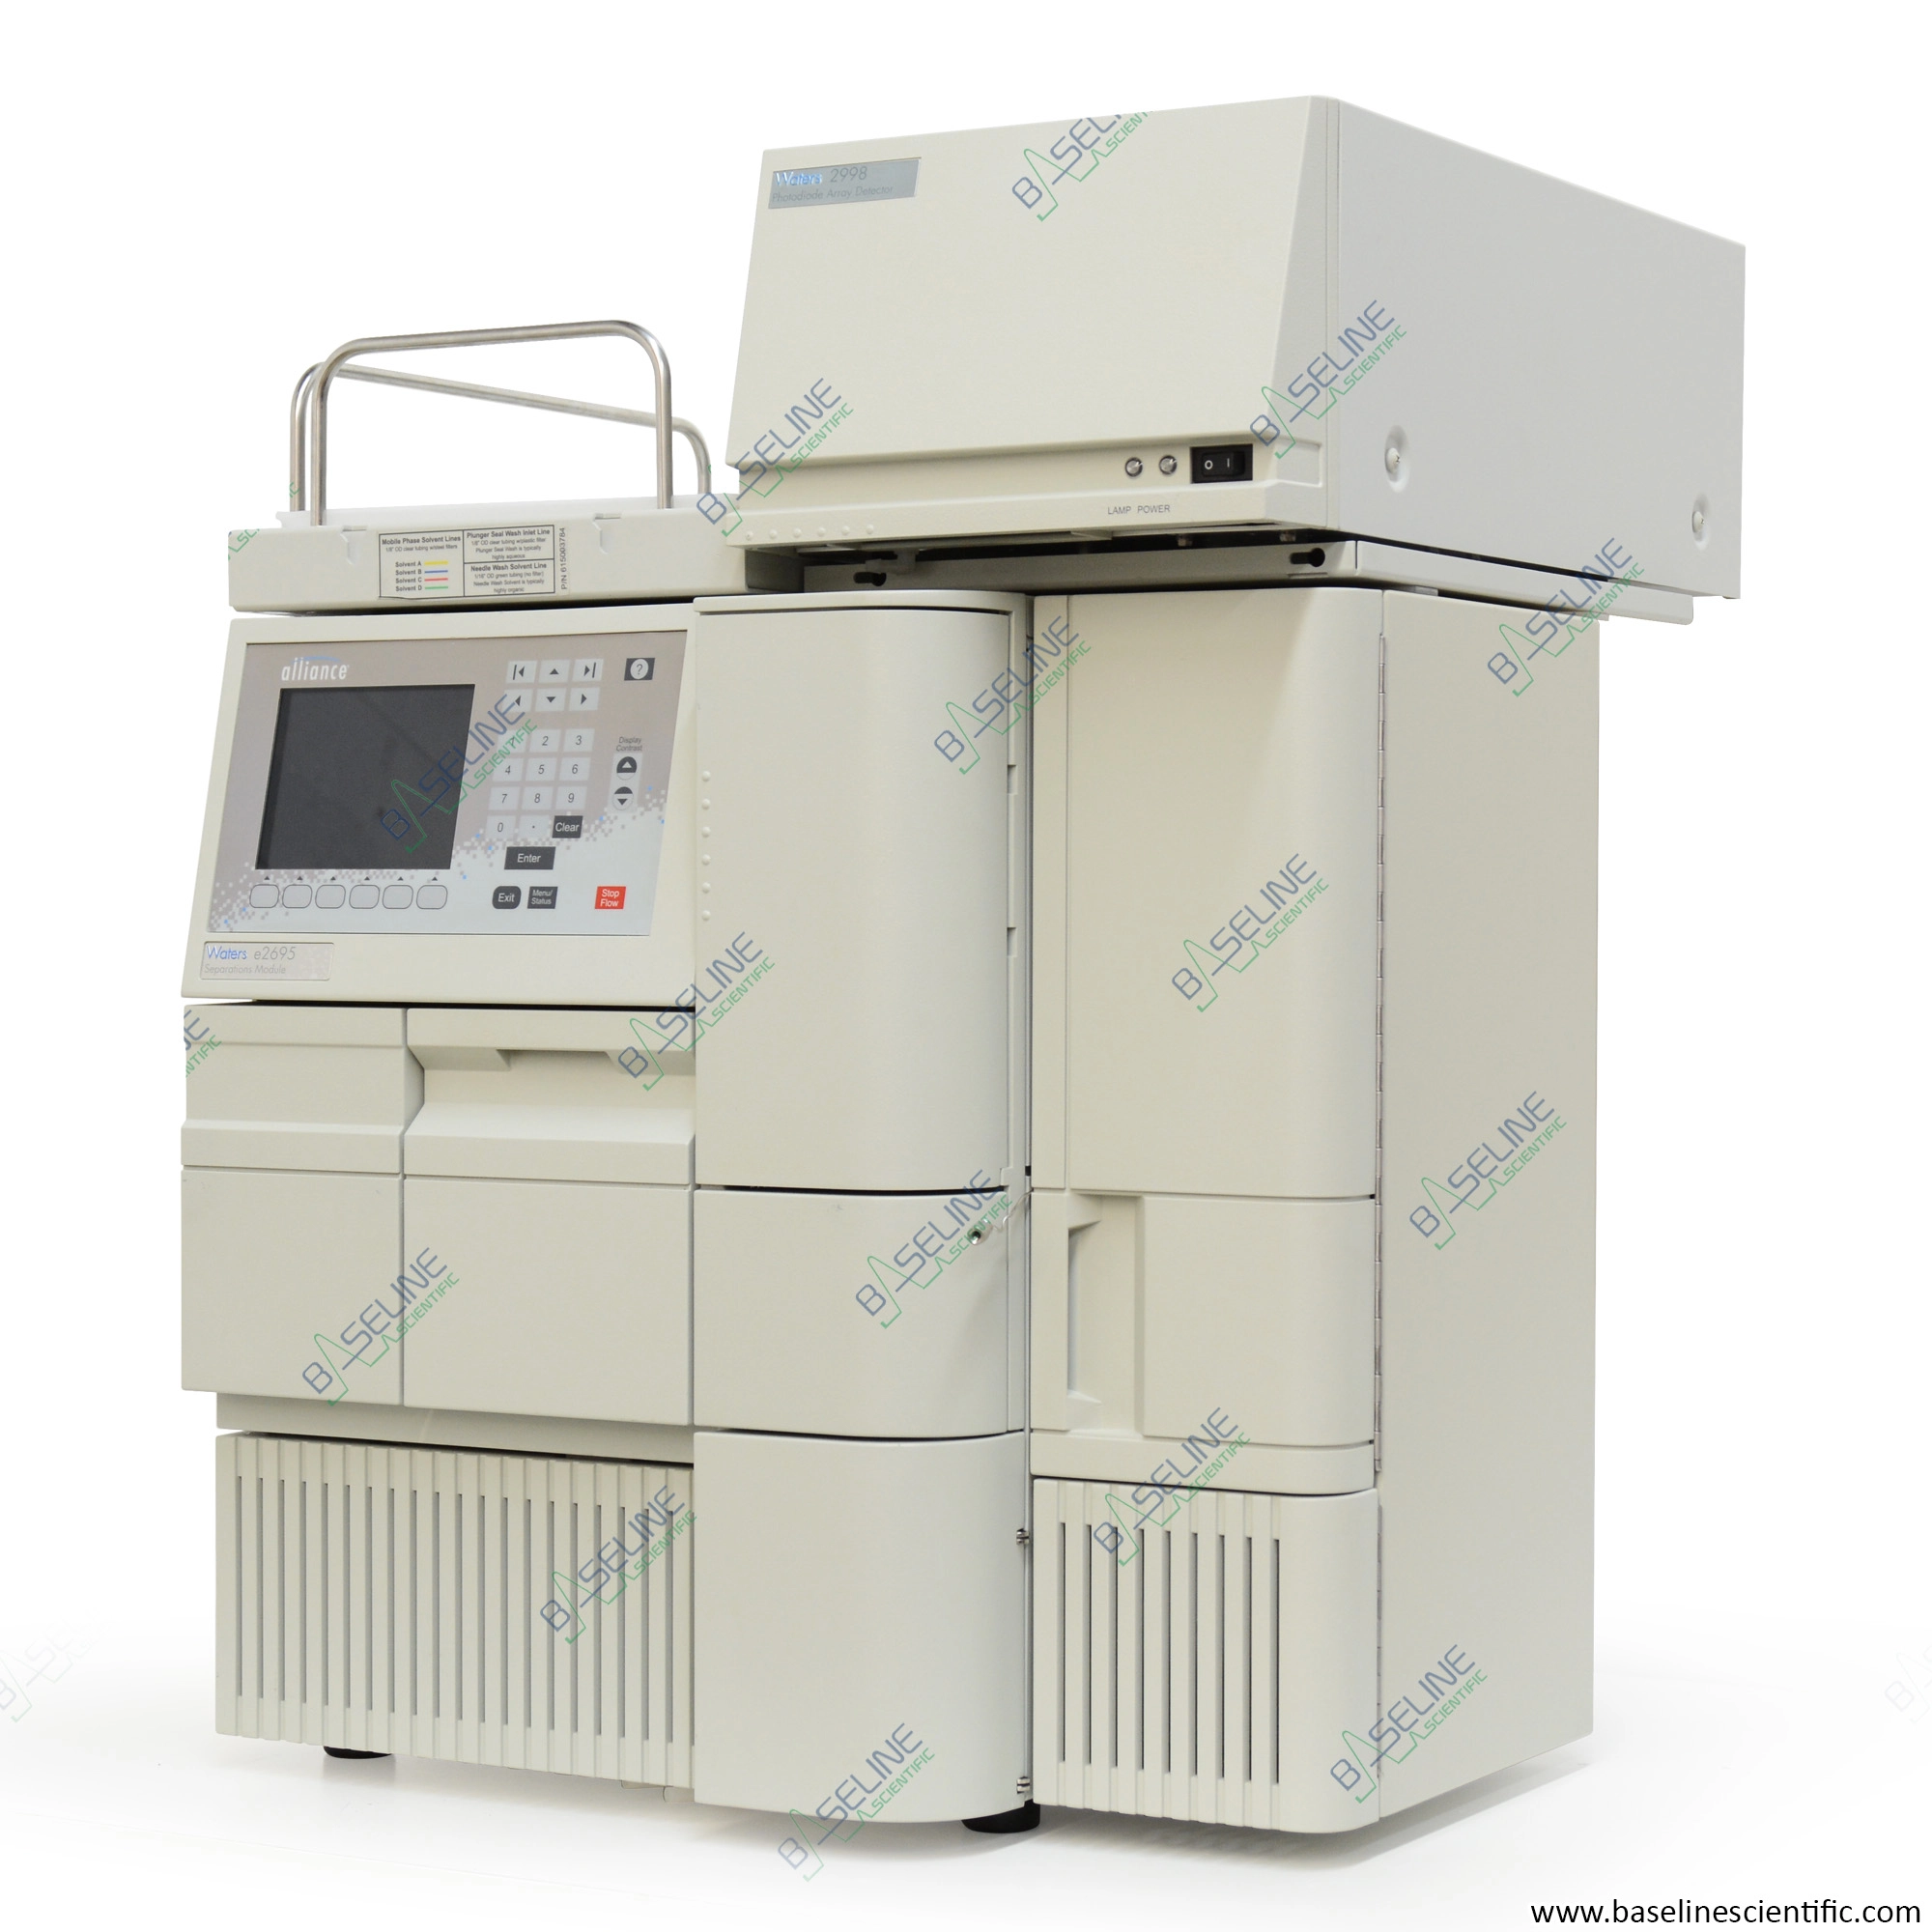 Waters Alliance e2695 HPLC and 2998 Photodiode Array Detector